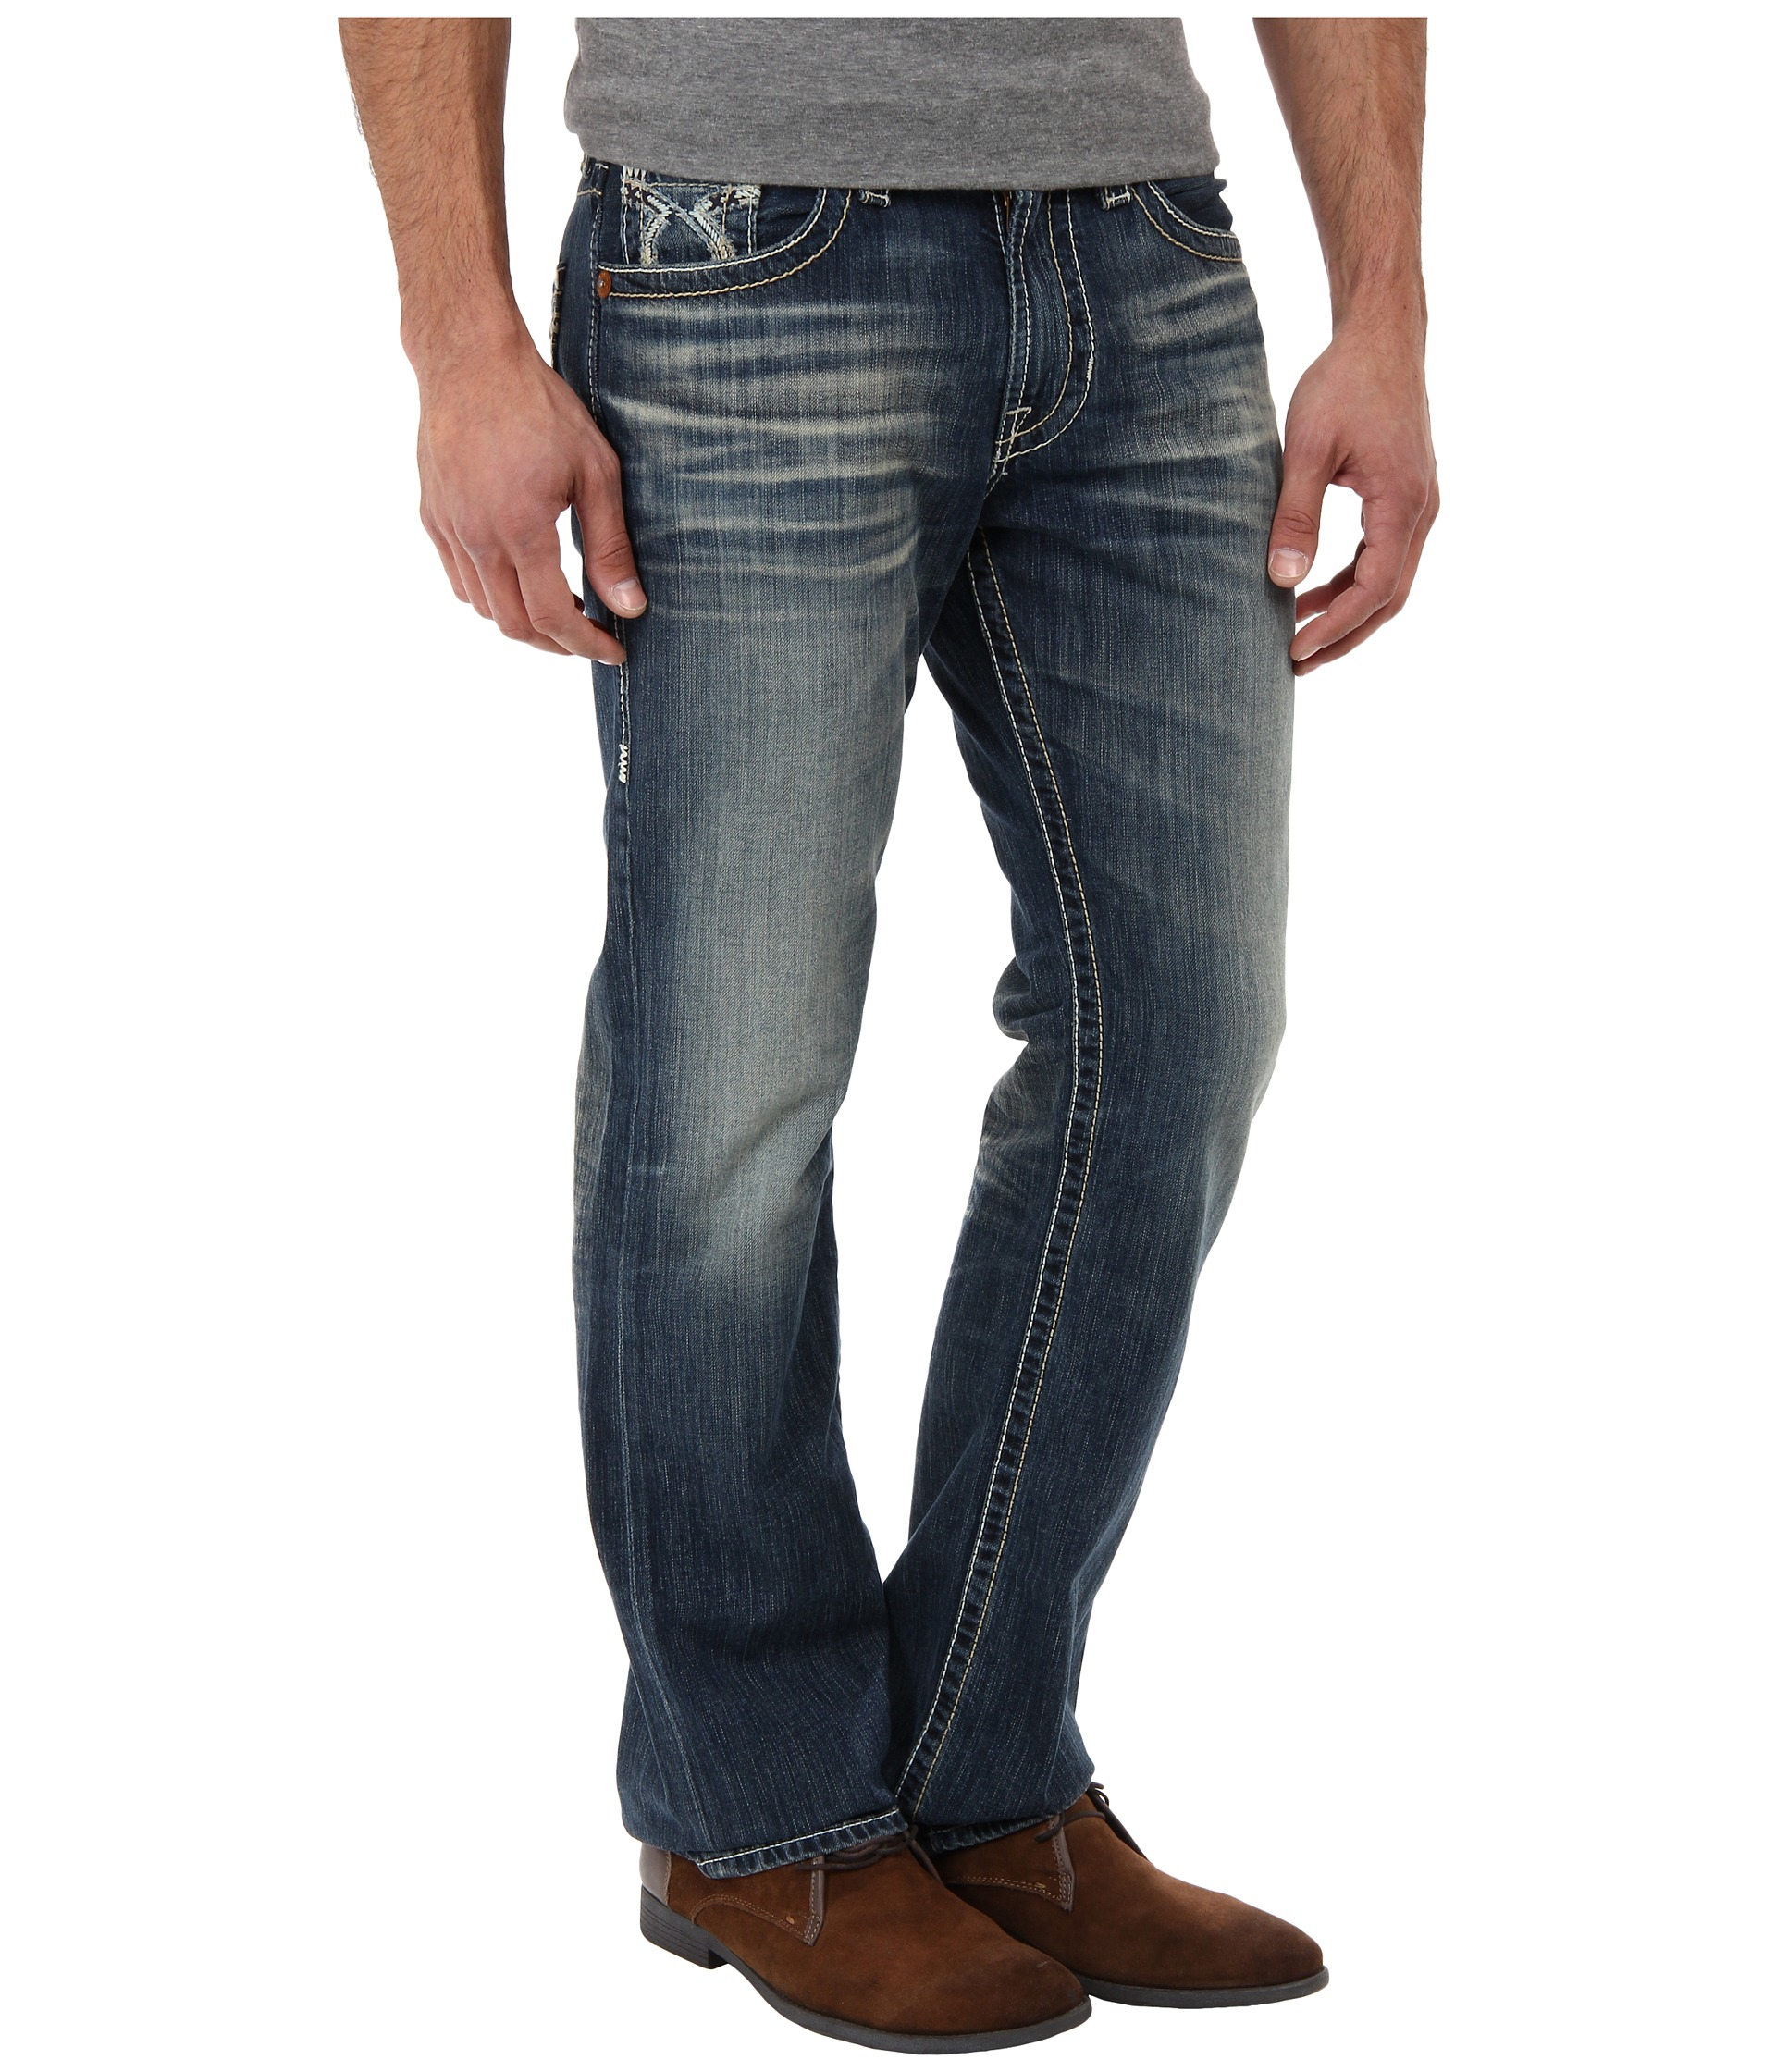 Lyst - Big Star Pioneer Bootcut Jeans in Blue for Men